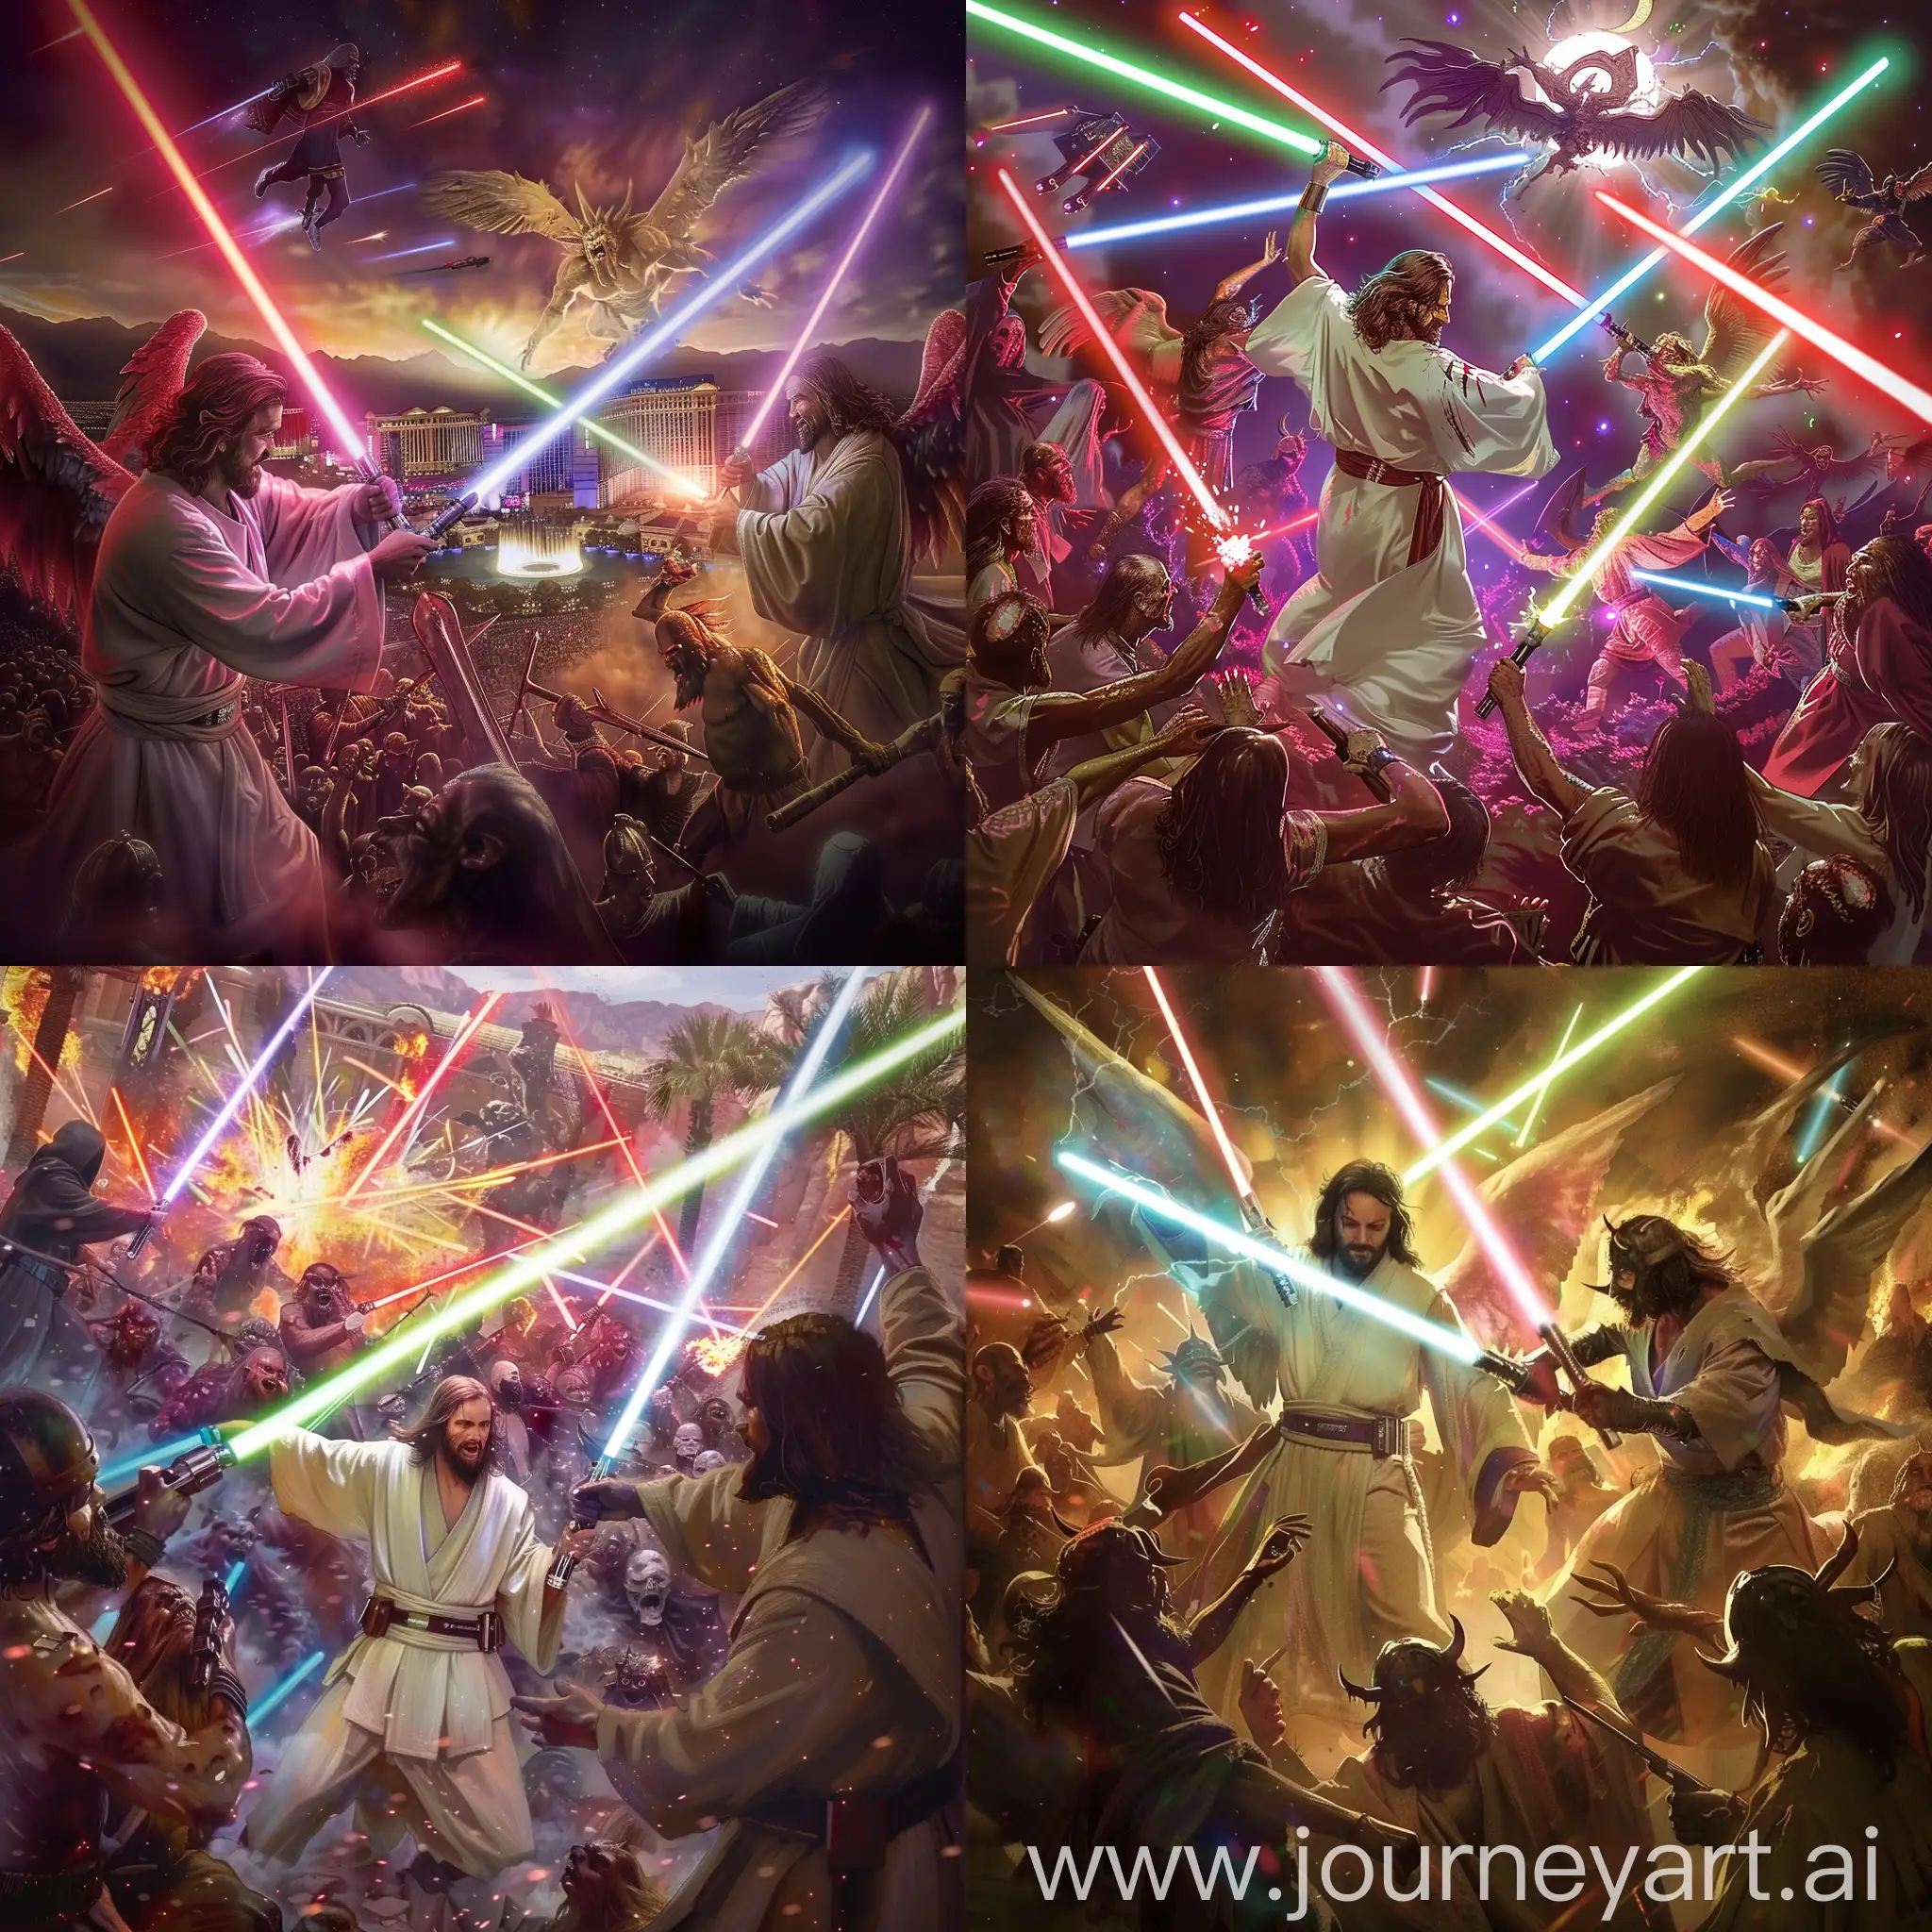 Epic-Battle-of-Jesus-Christ-and-Angels-versus-Allah-and-Demons-with-Lightsabers-in-Las-Vegas